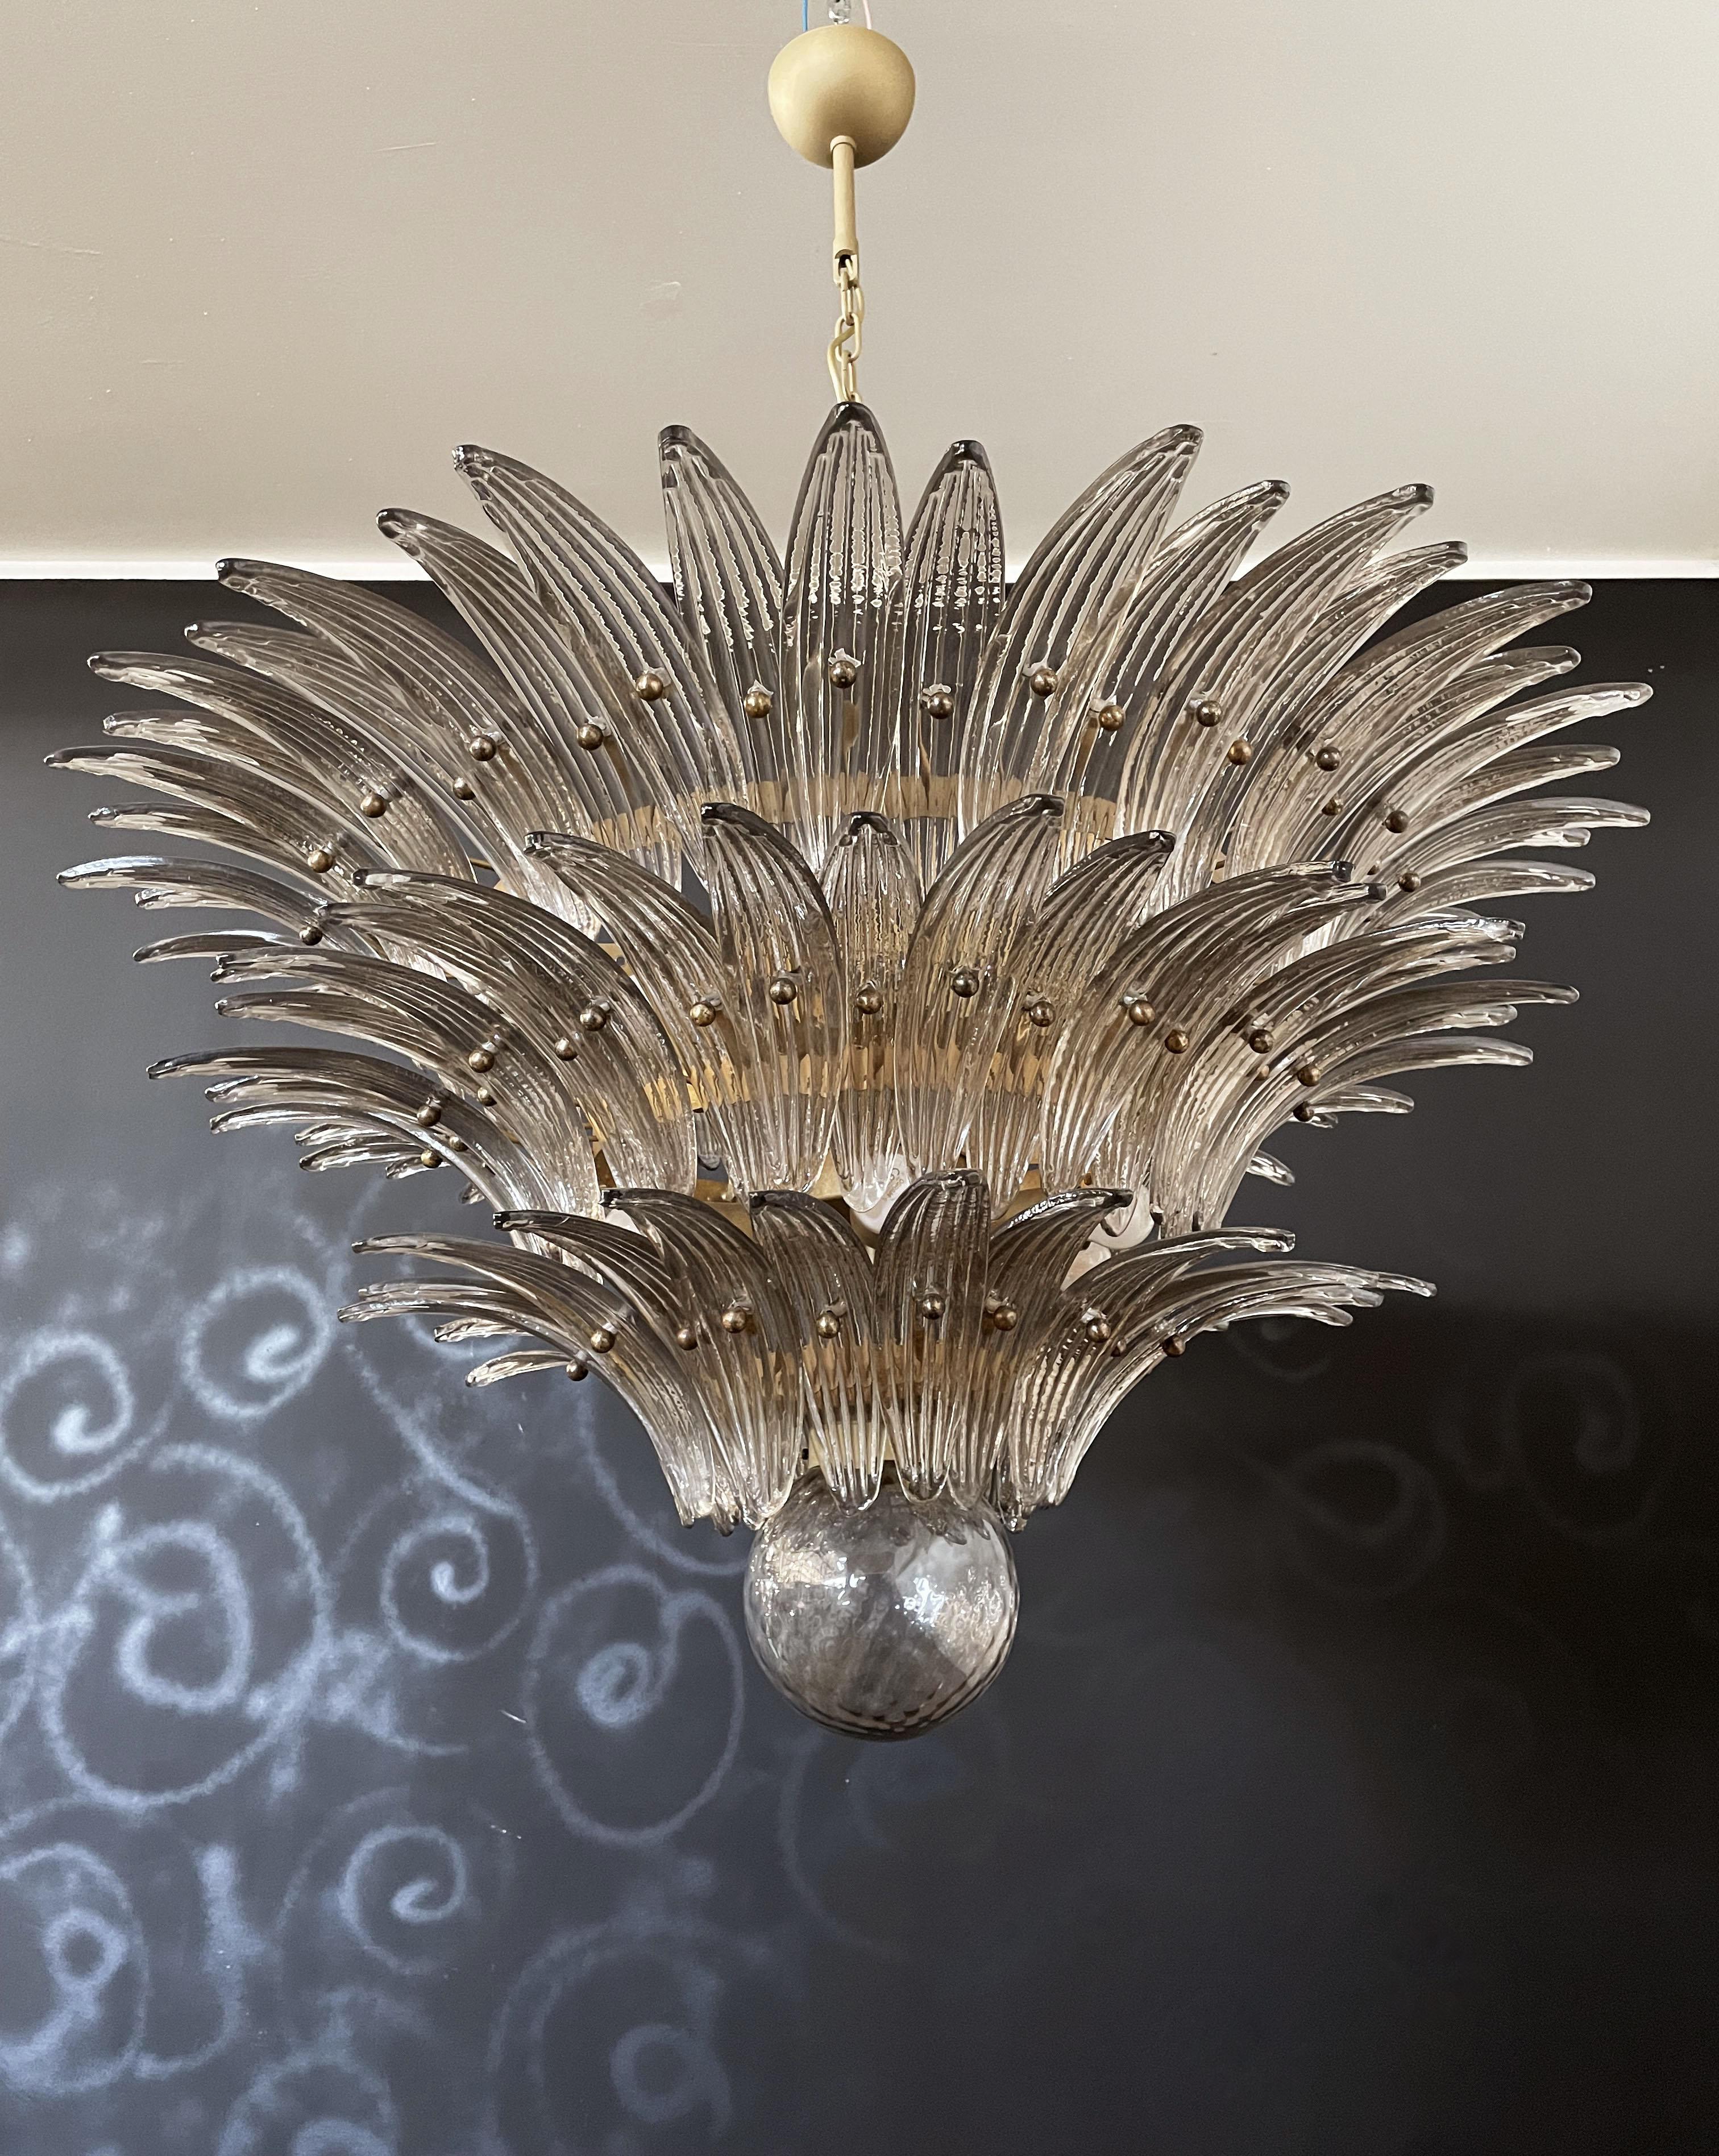 Palmette ceiling light made by 104 Murano smoked glasses in a gold metal frame. Murano blown glass in a traditional way. Structure in gold colored metal.
Period: 1980's
Dimensions: 47,25 inches (120 cm) height with chain; 25,60 inches (65 cm) height